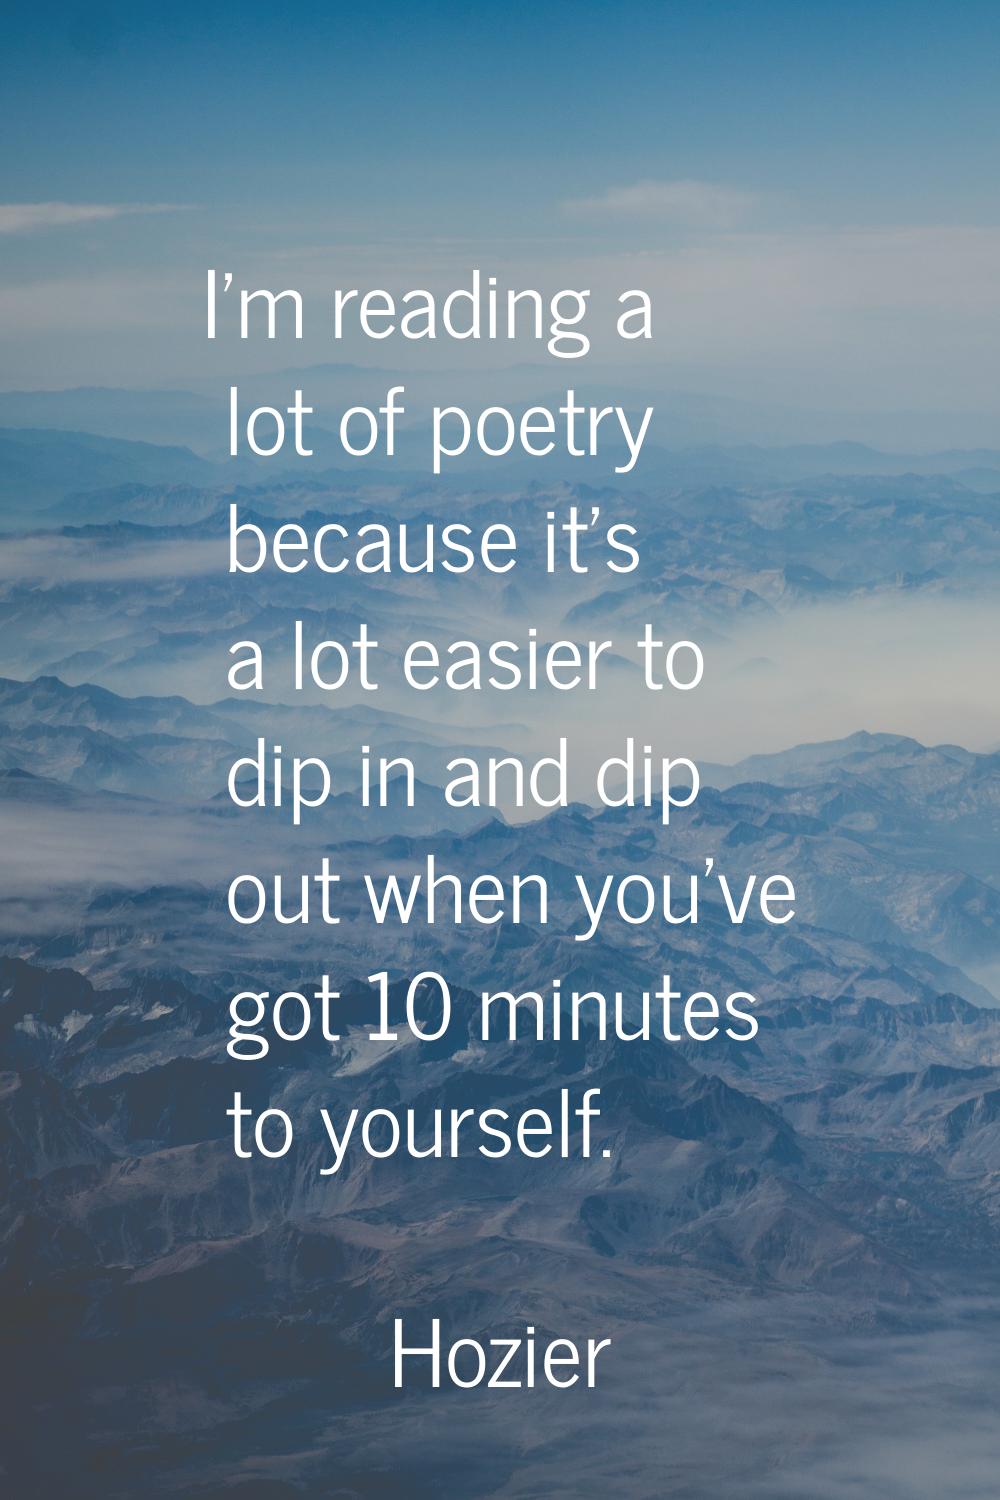 I'm reading a lot of poetry because it's a lot easier to dip in and dip out when you've got 10 minu